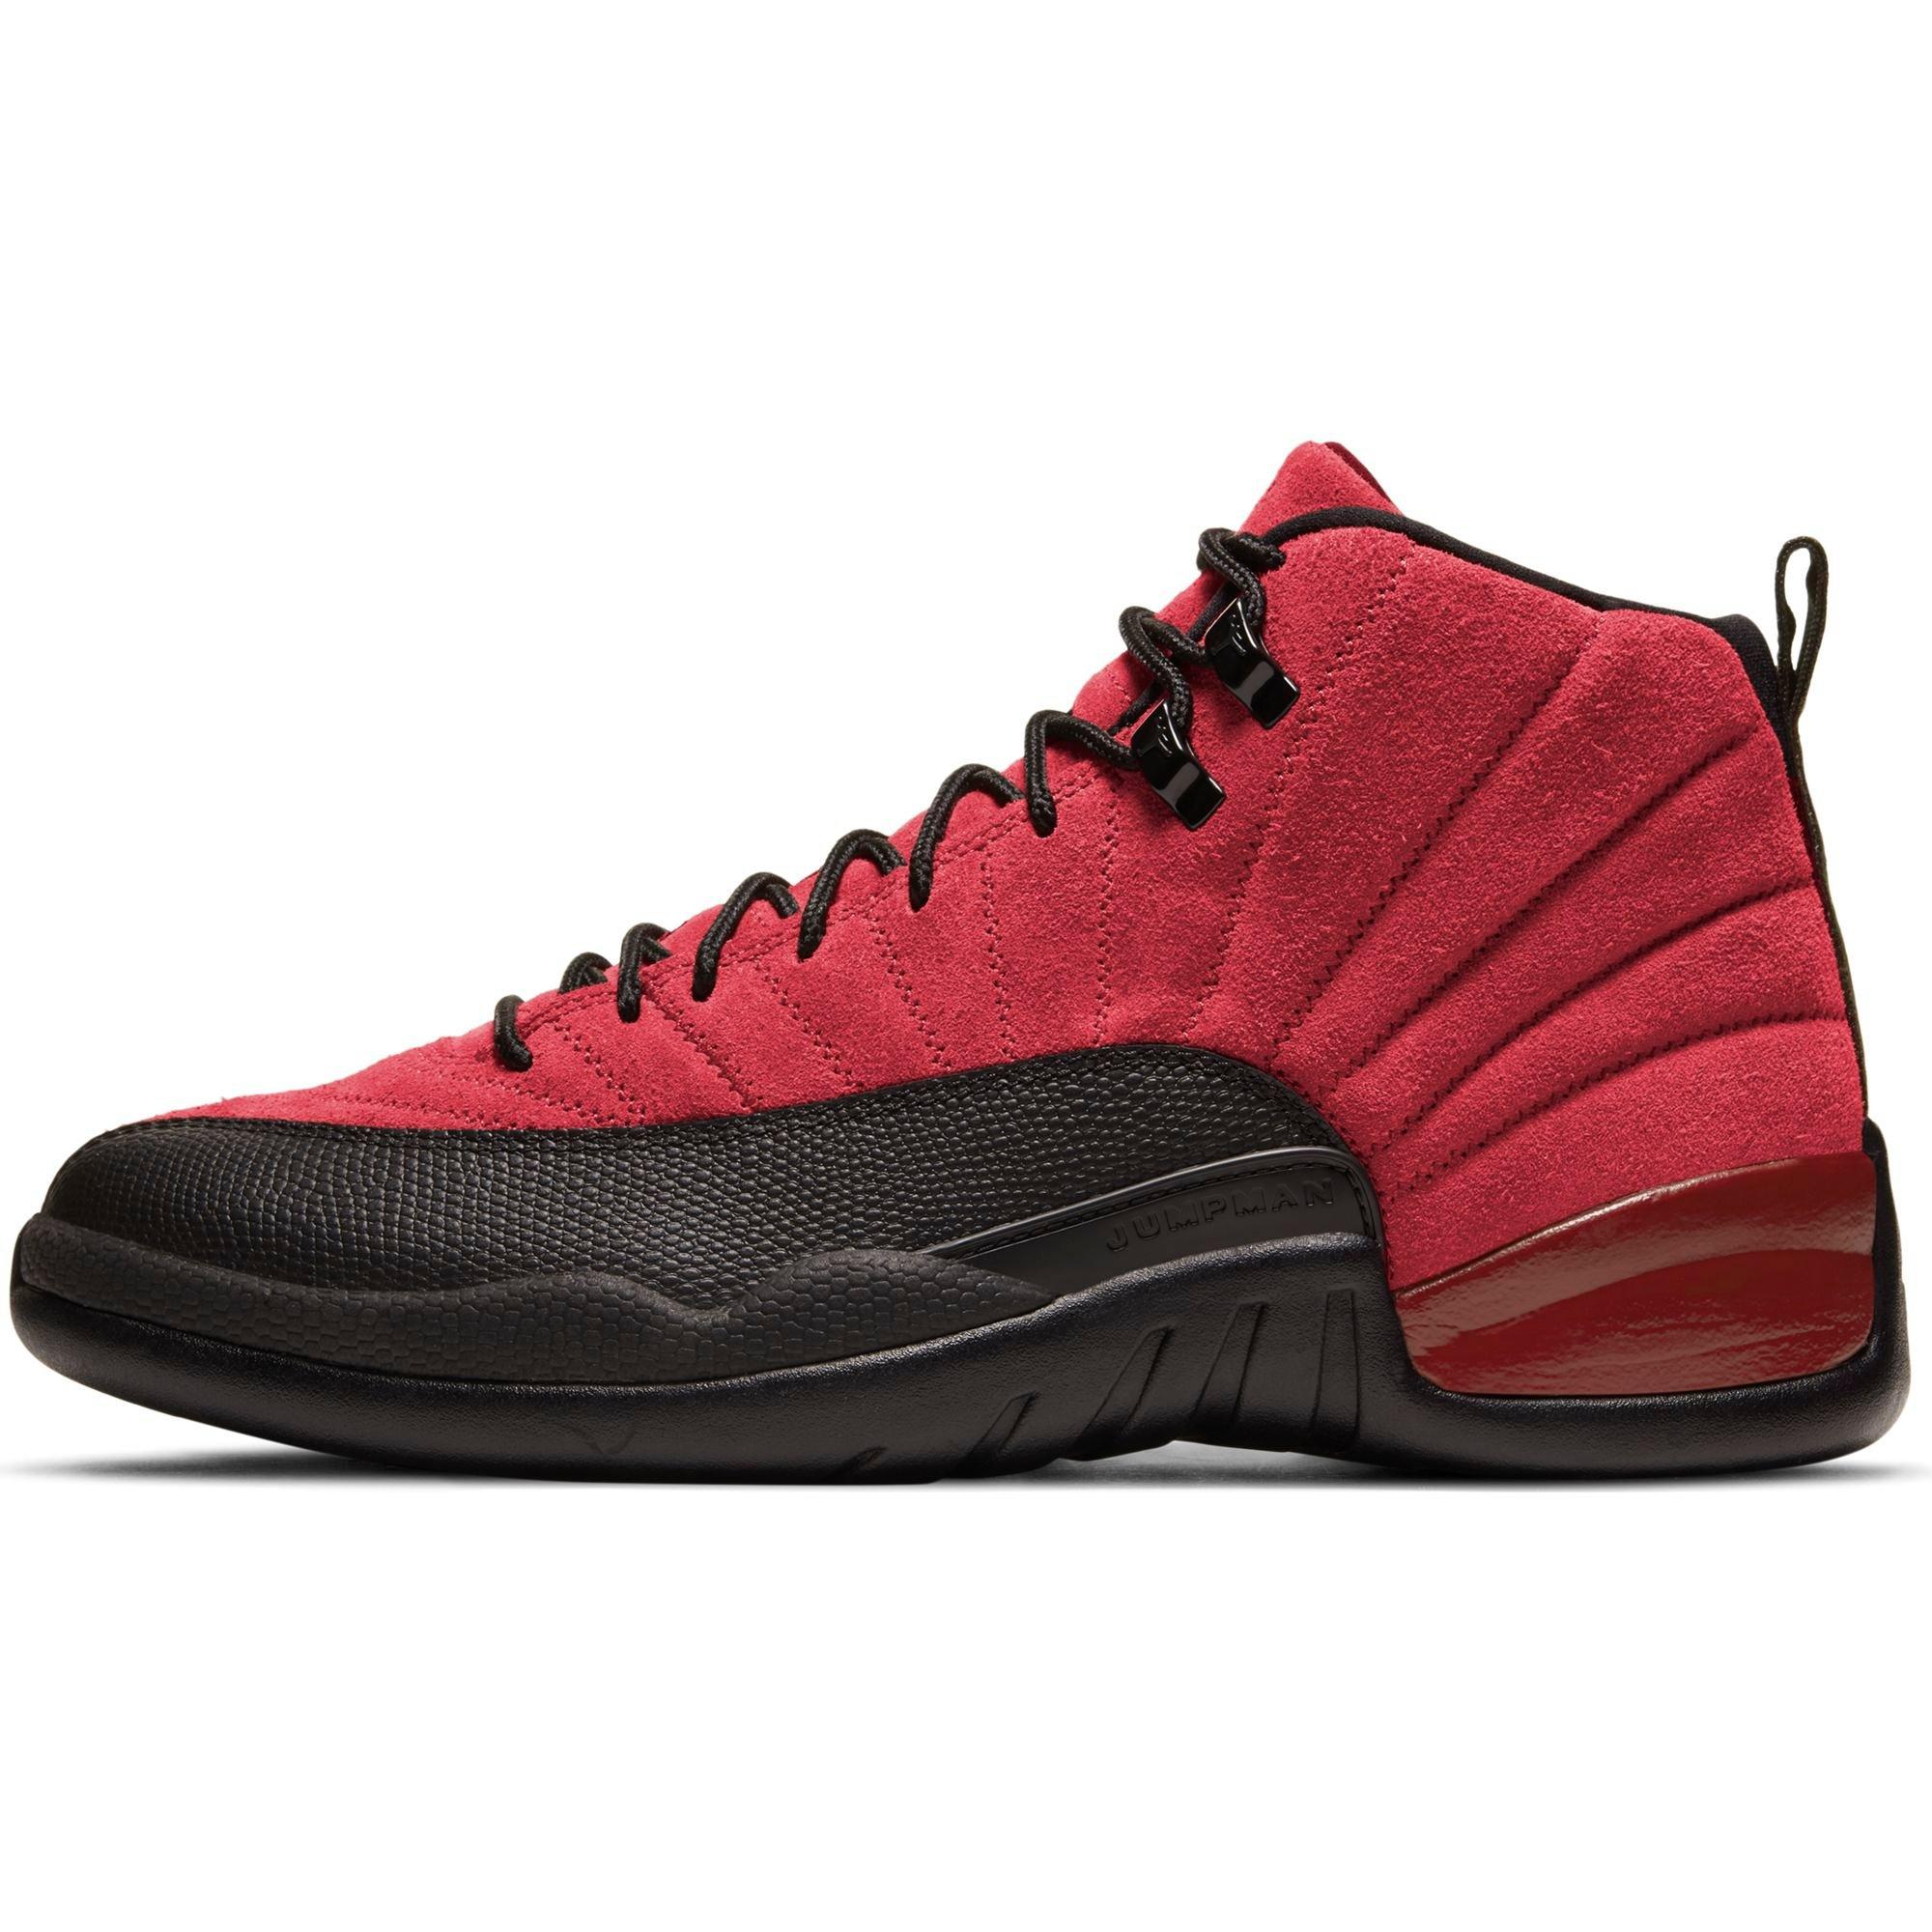 retro 12s red and black